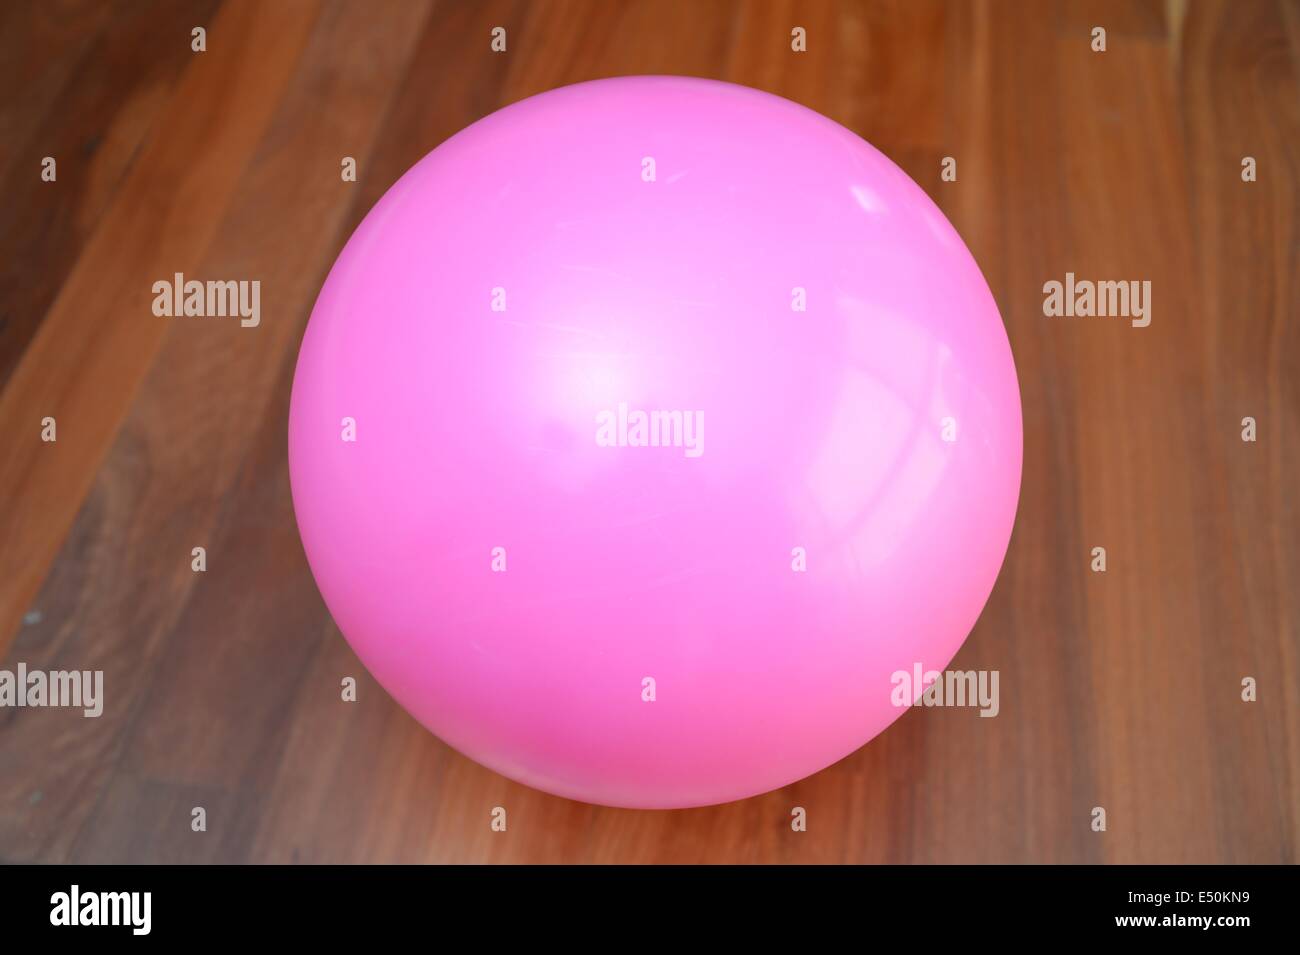 A close up shot of a fitness ball Stock Photo